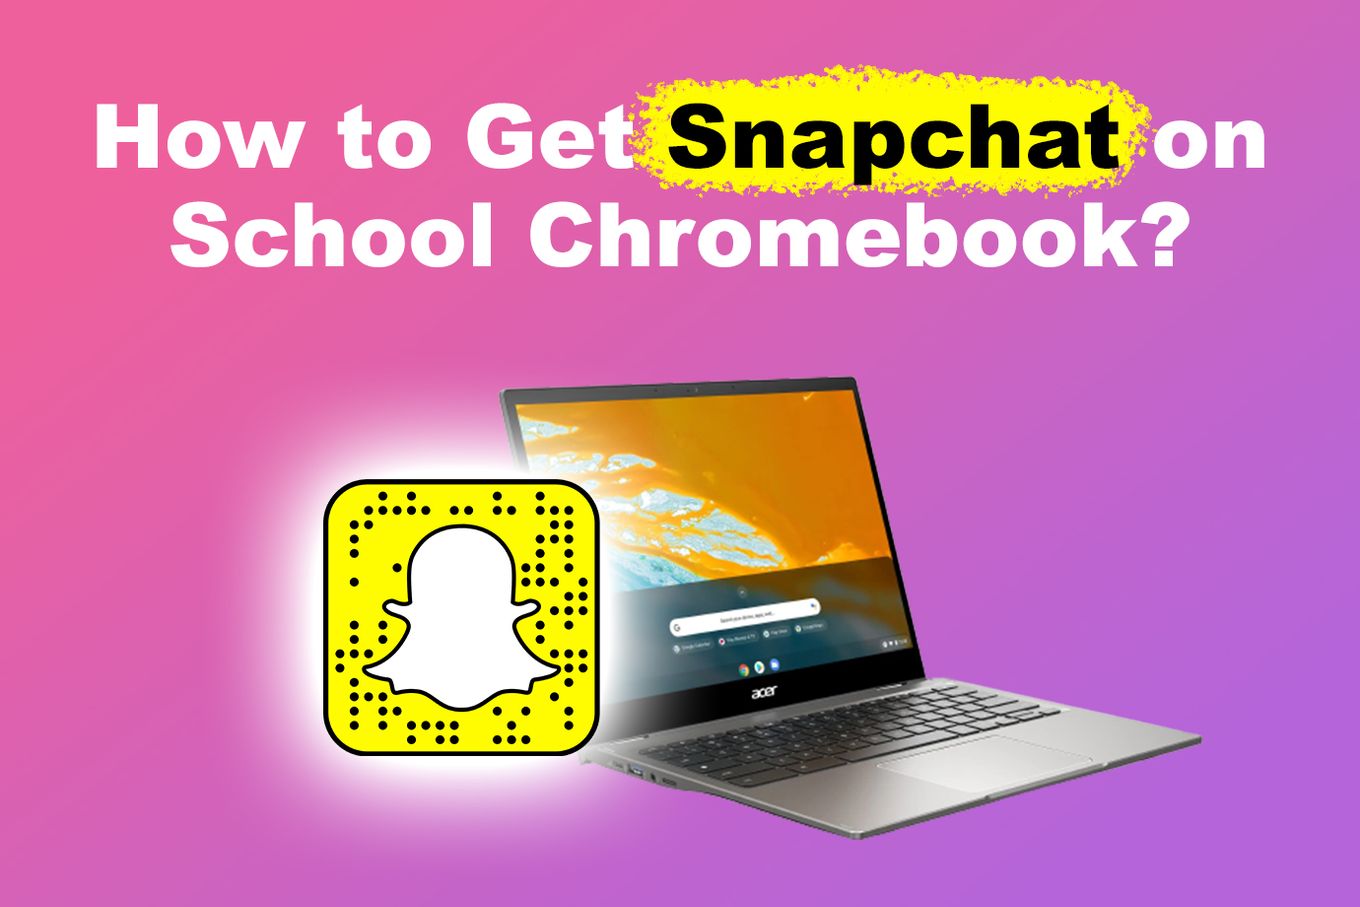 How to Get Snapchat on School Chromebook